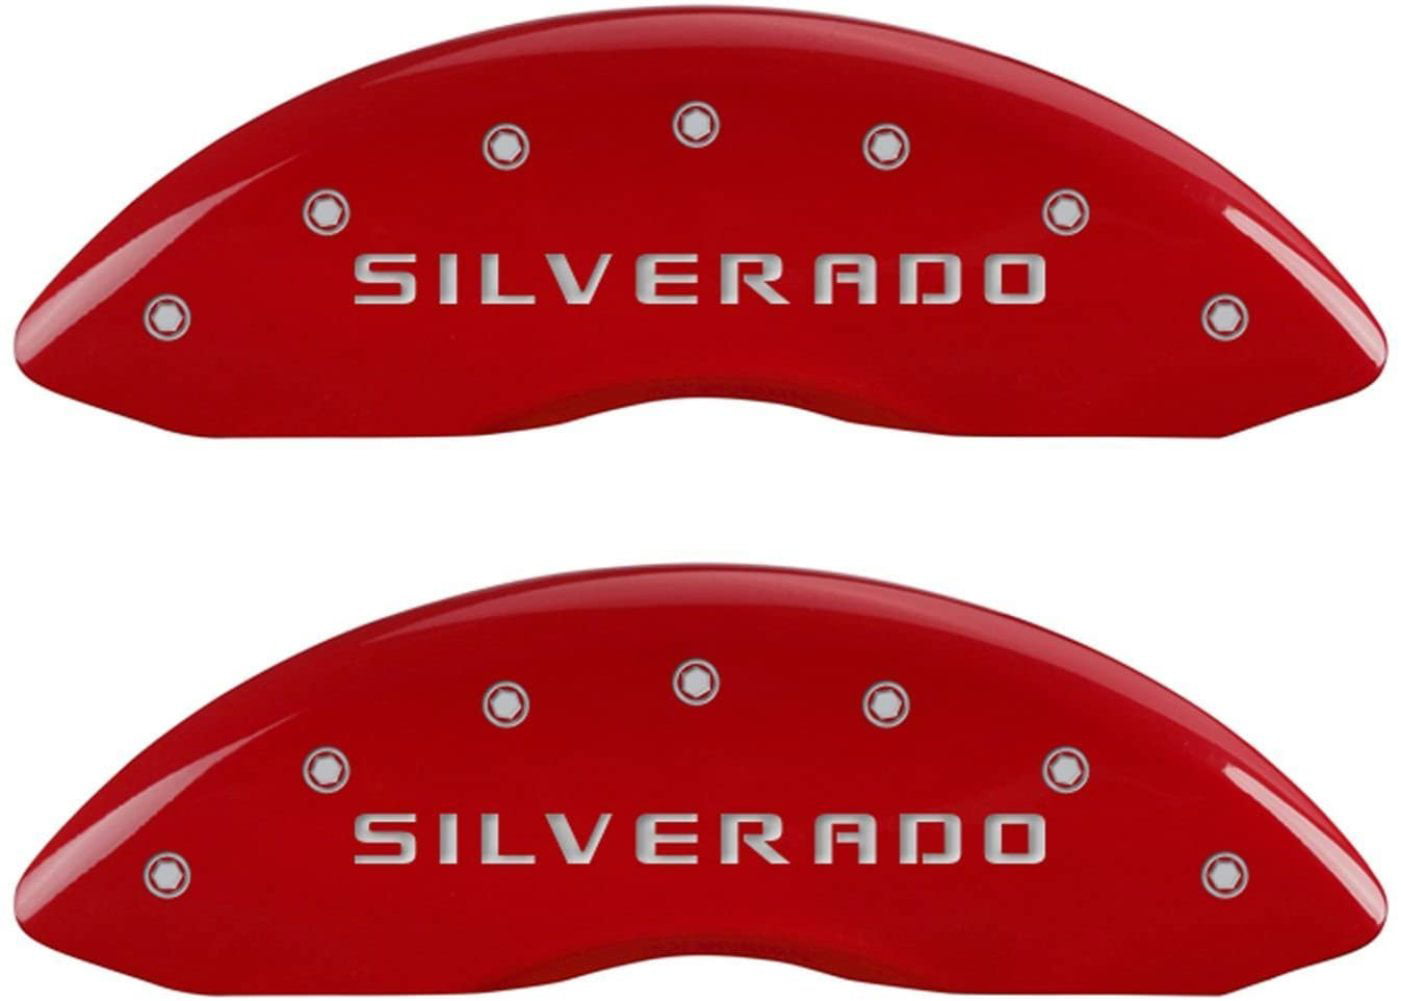 Set of 2 MGP Caliper Covers 14207FSILRD SILVERADO Engraved Caliper Cover with Red Powder Coat Finish and Silver Characters, 